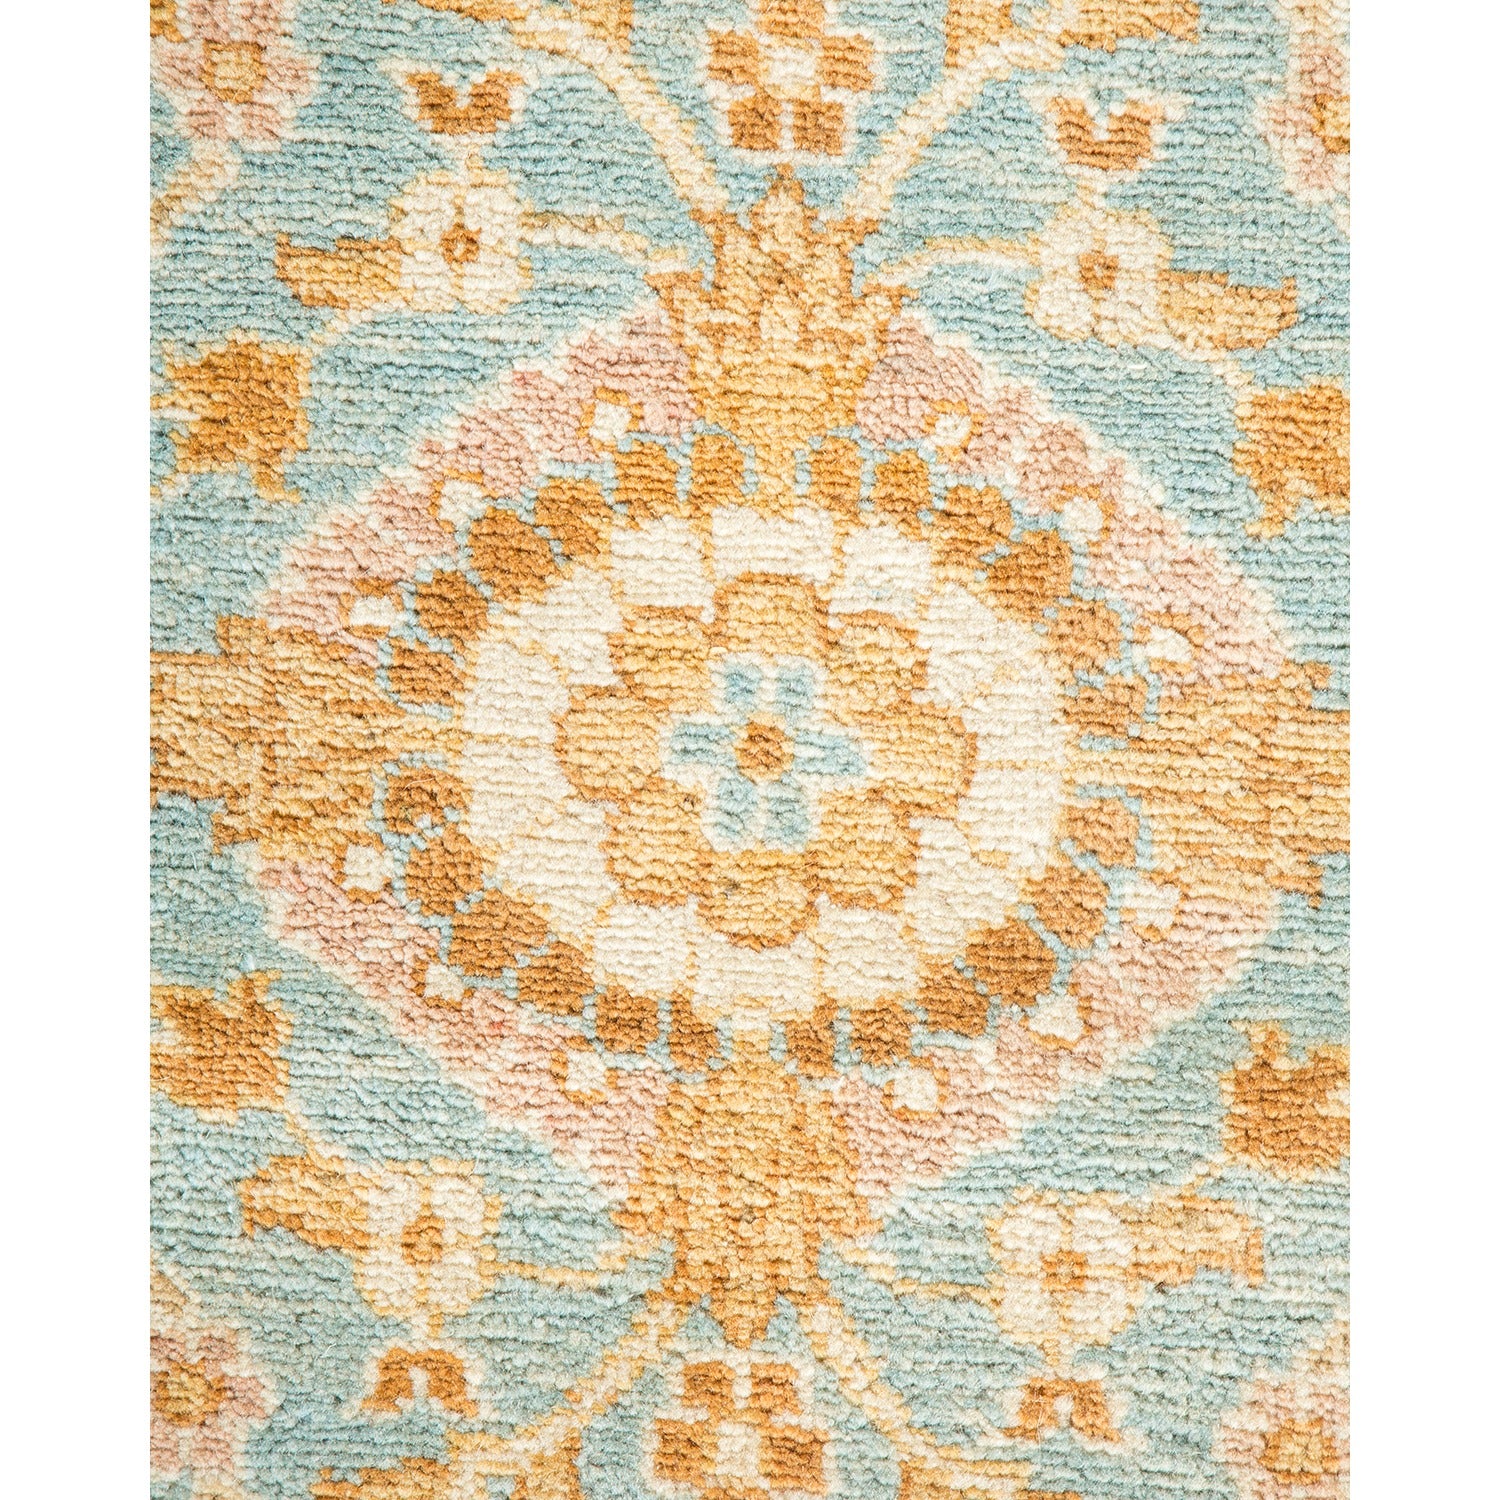 Close-up photo of a floral-patterned carpet with soft colors.